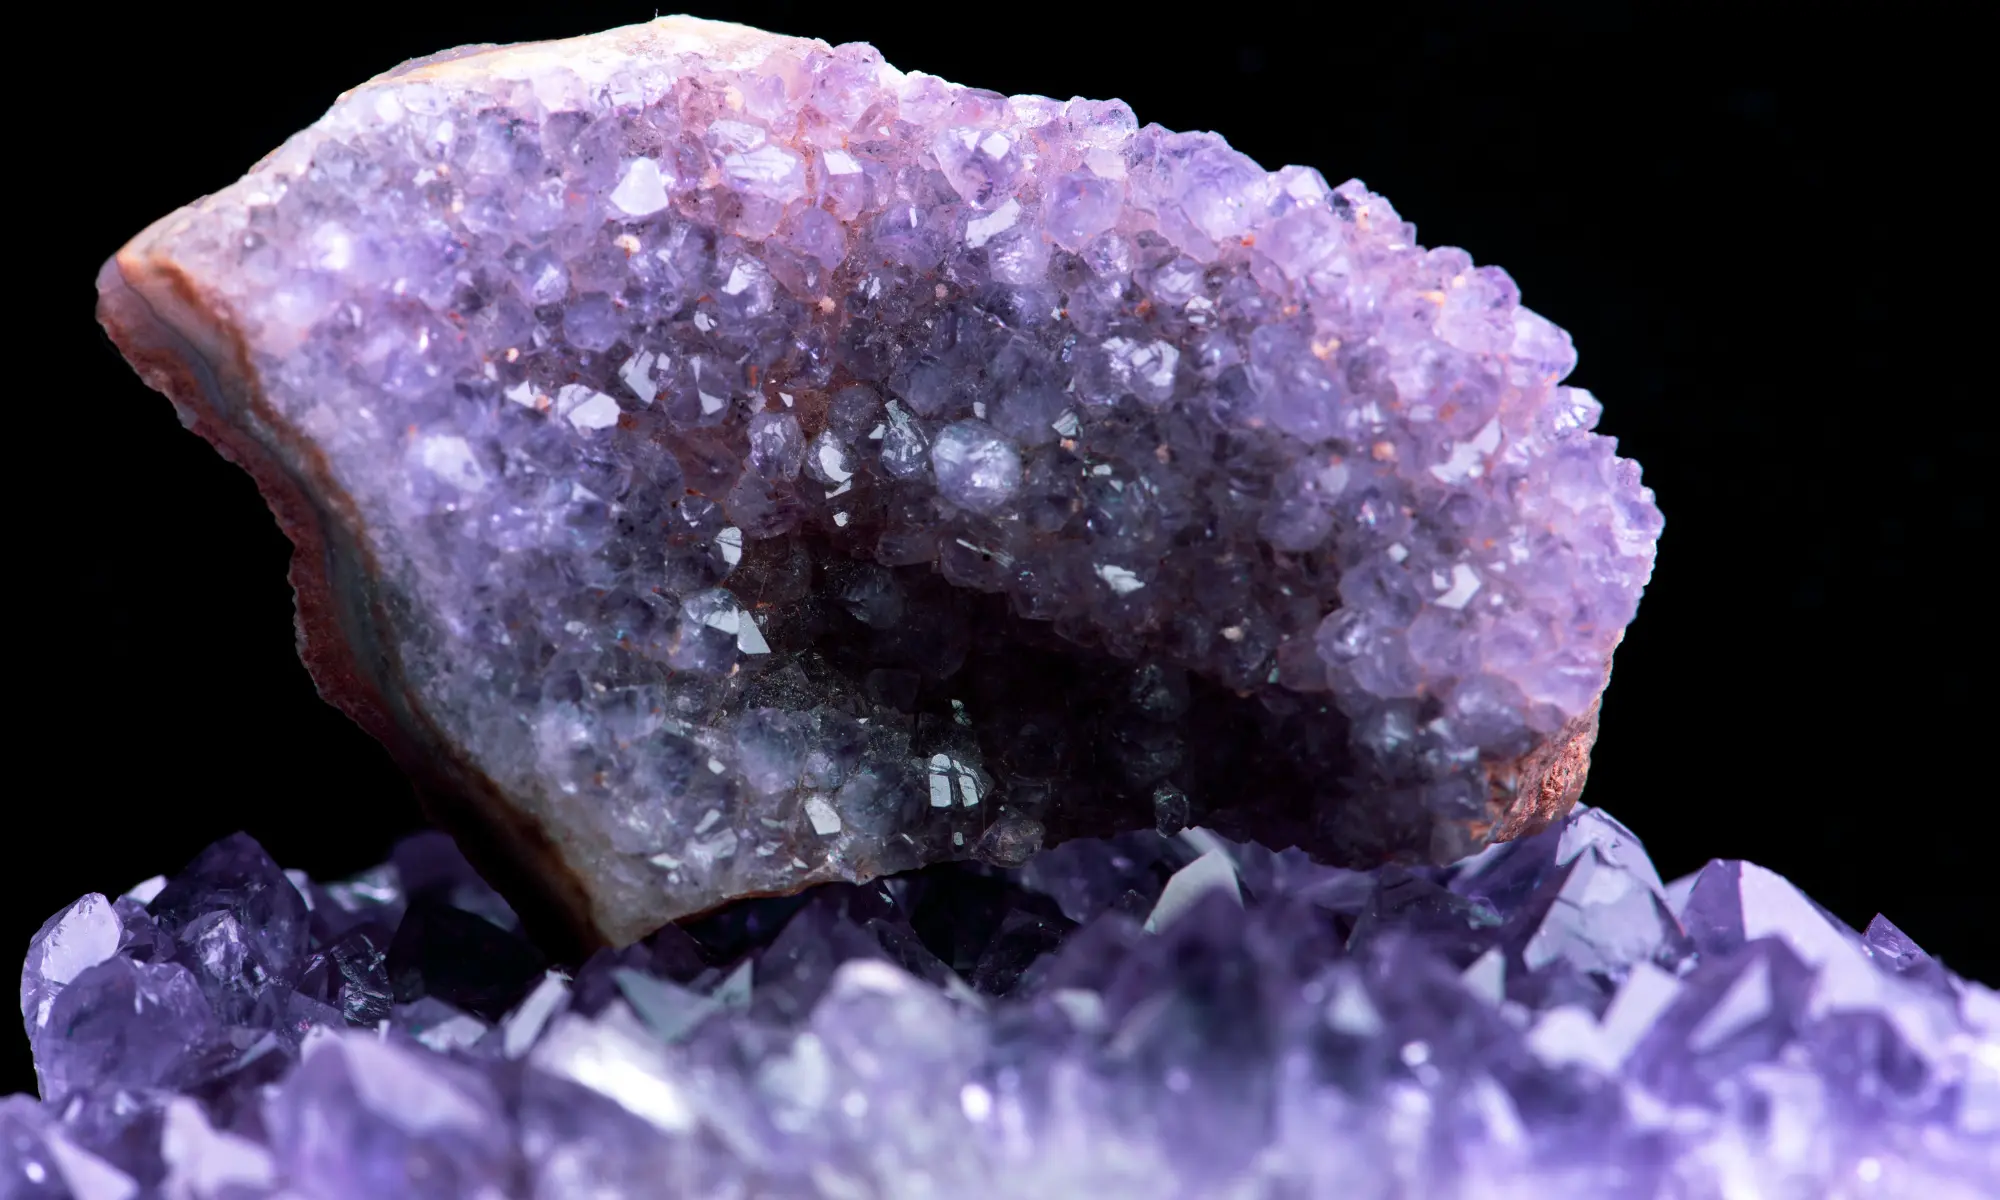 An amethyst crystal geode against a black background.